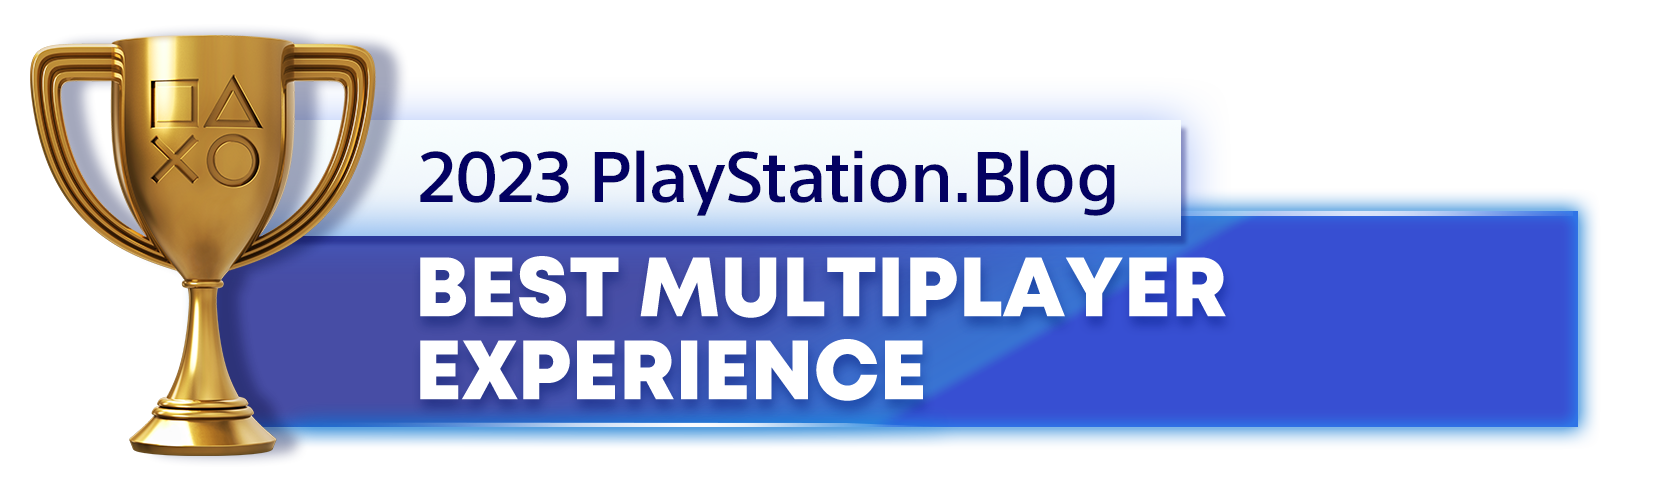  "Gold Trophy for the 2023 PlayStation Blog Best Multiplayer Experience Winner"